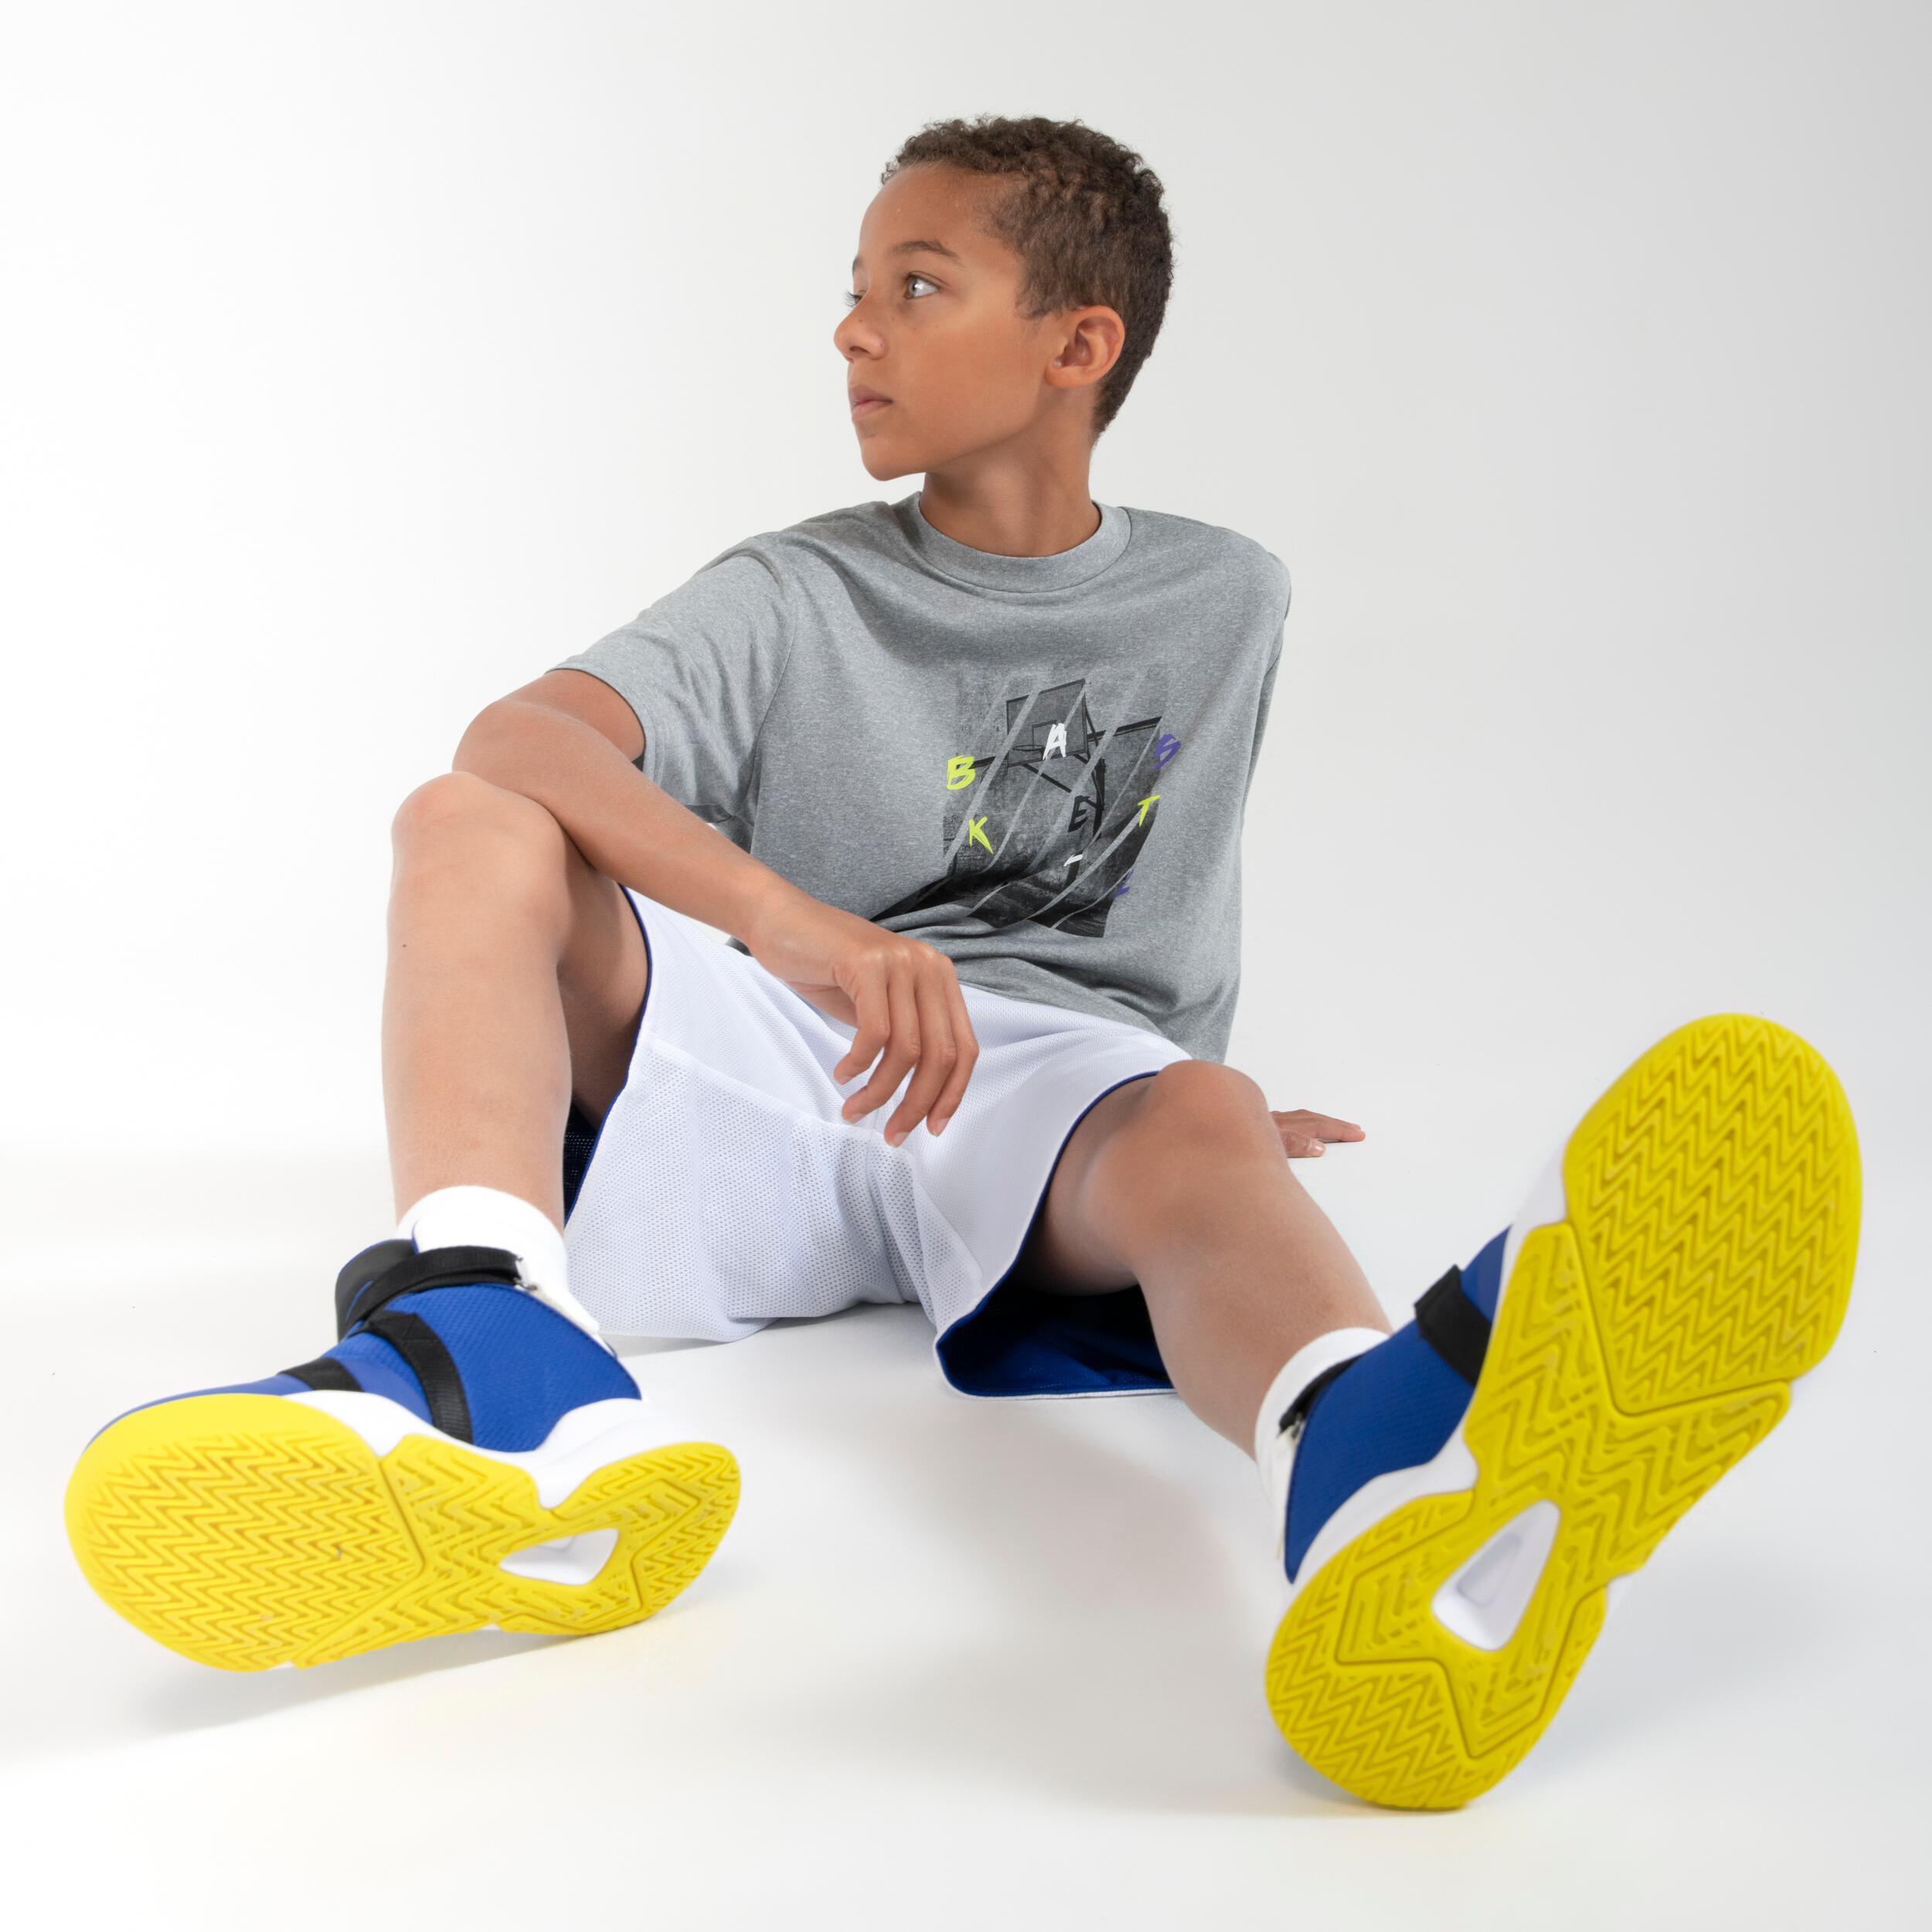 Kids' Basketball Shoes Easy X - Blue/Yellow 8/8